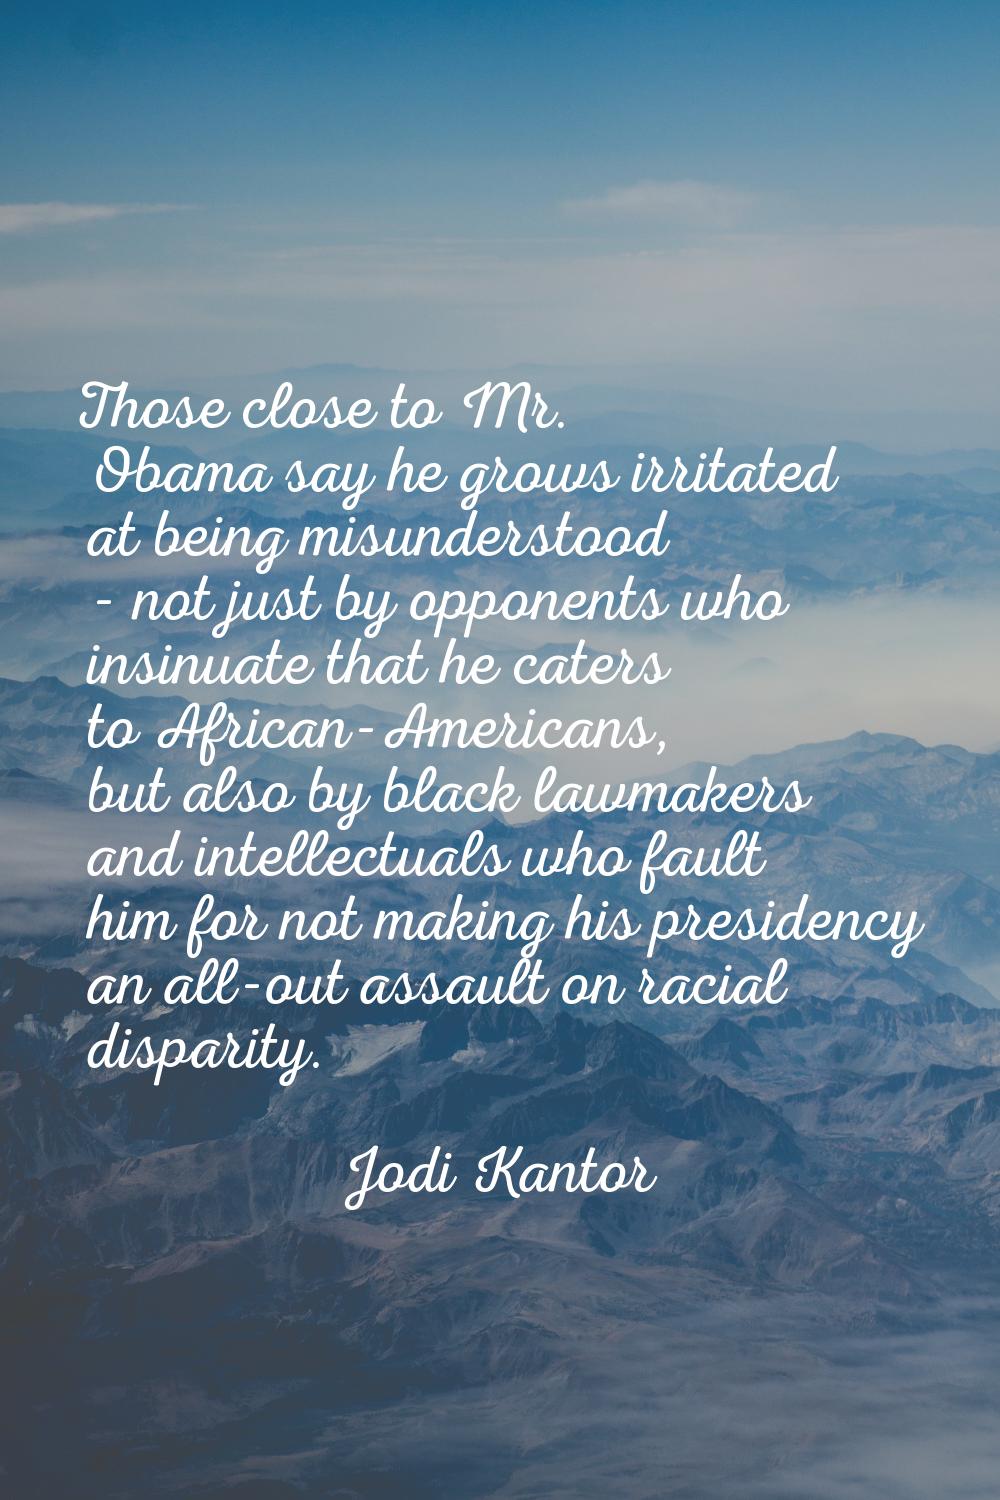 Those close to Mr. Obama say he grows irritated at being misunderstood - not just by opponents who 